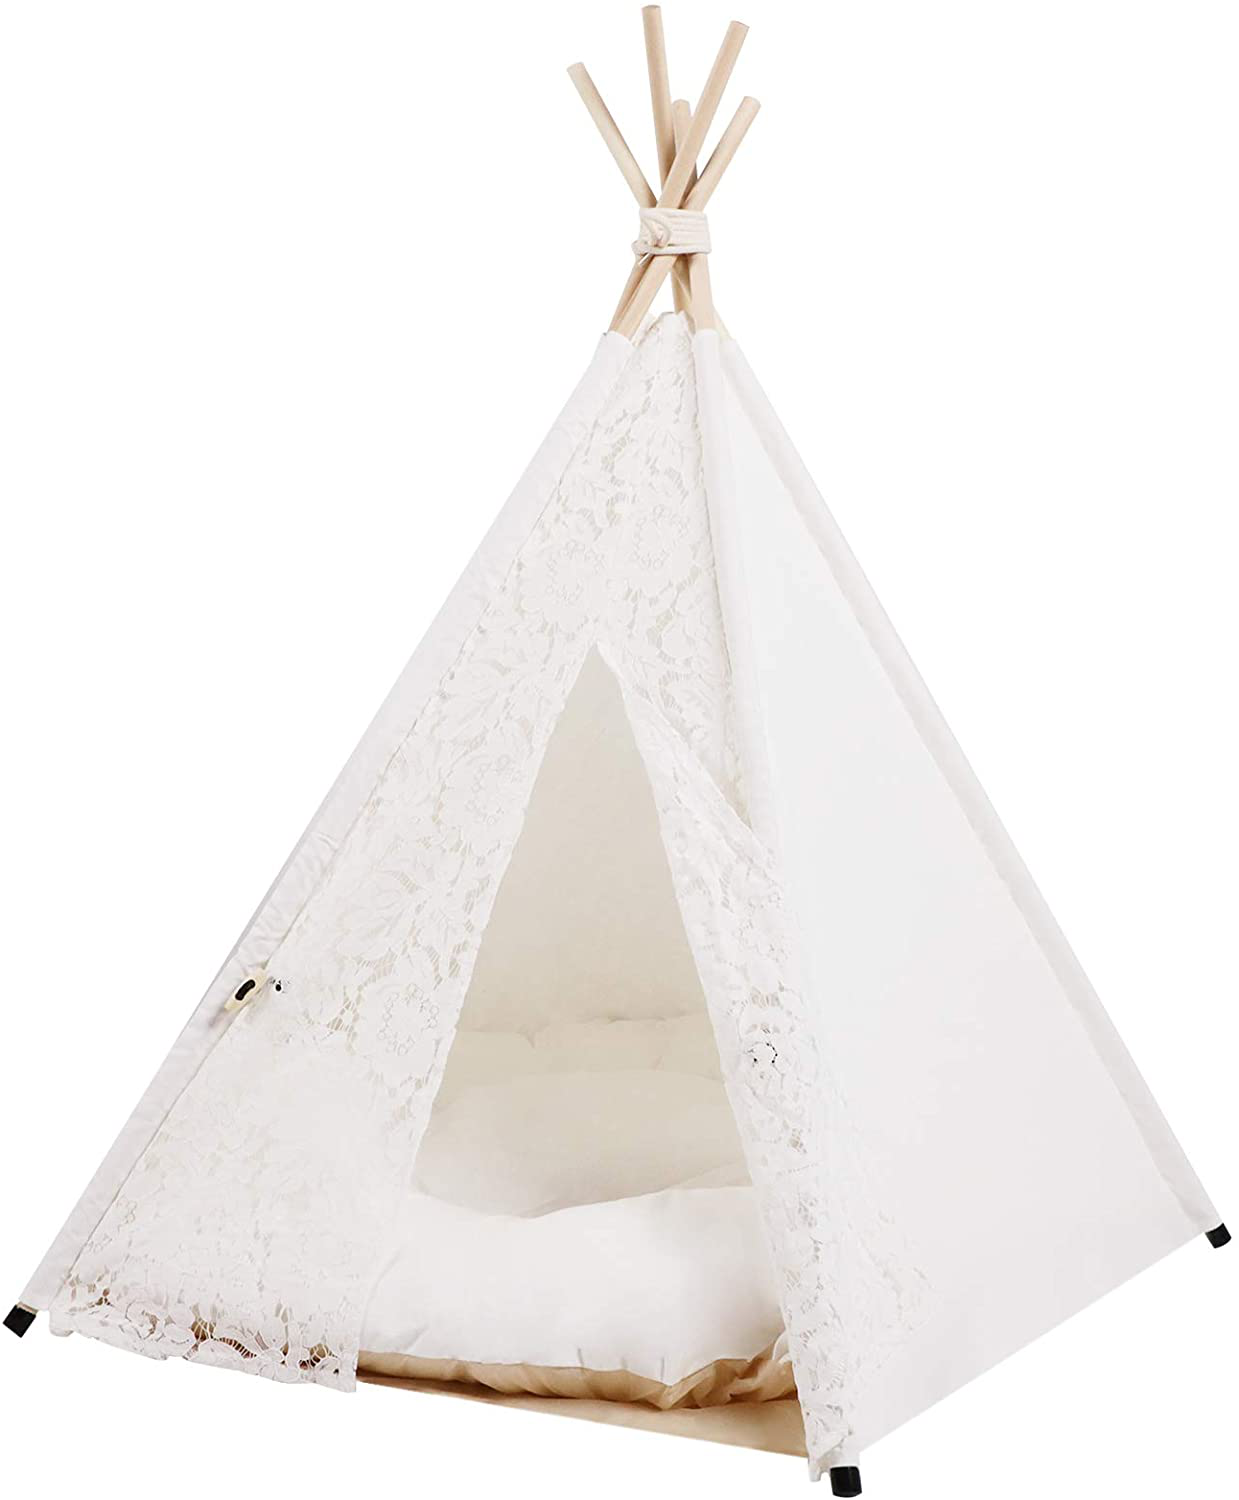 DEWEL Pet Teepee with Cushion Dog & Cat Tent with Soft Bed Portable Pet House for Small Medium Dogs and Cats, 27.5 Inch Tall Foldable Pet Teepee Tent for Puppy and Rabbit Indoor